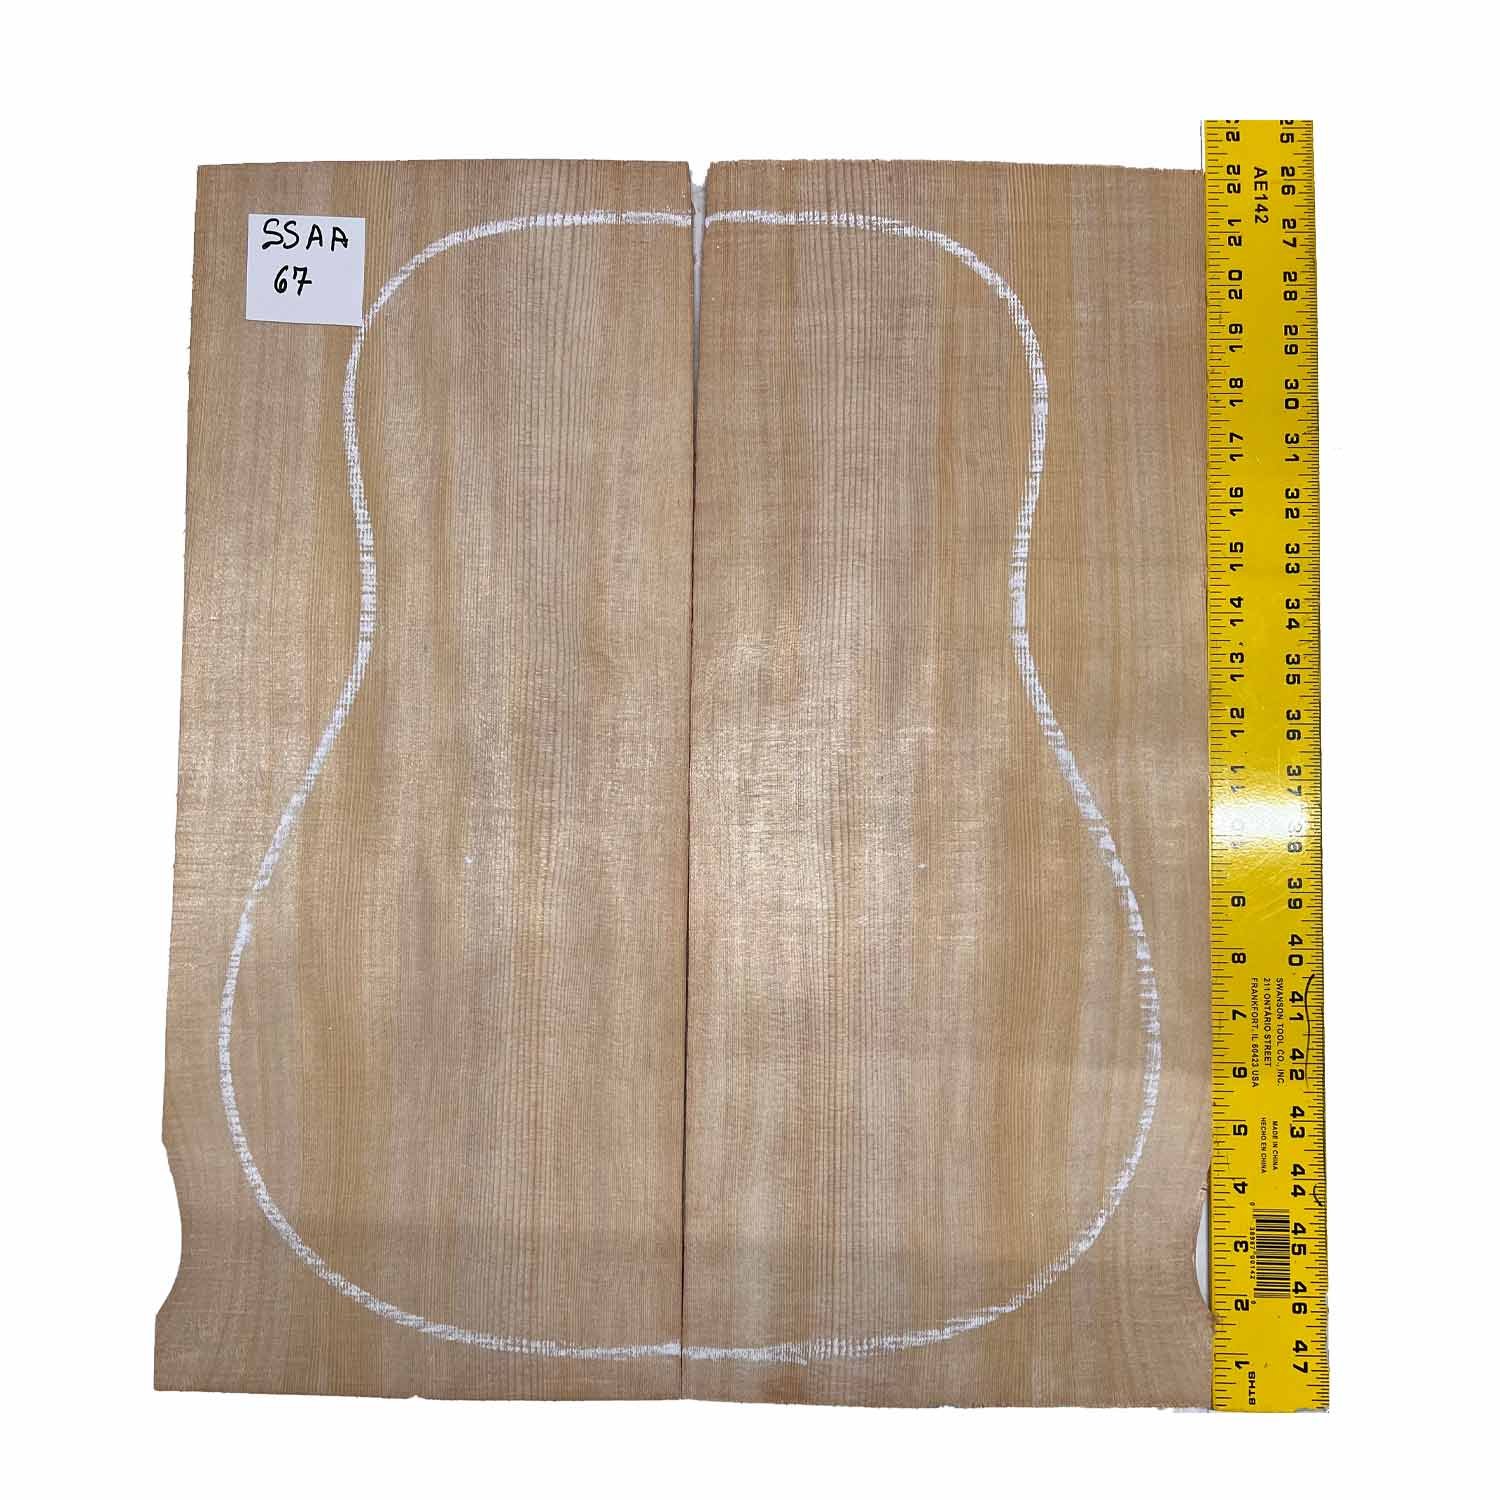 Sitka Spruce Classical Guitar Wood Tops Bookmatched SS AA 